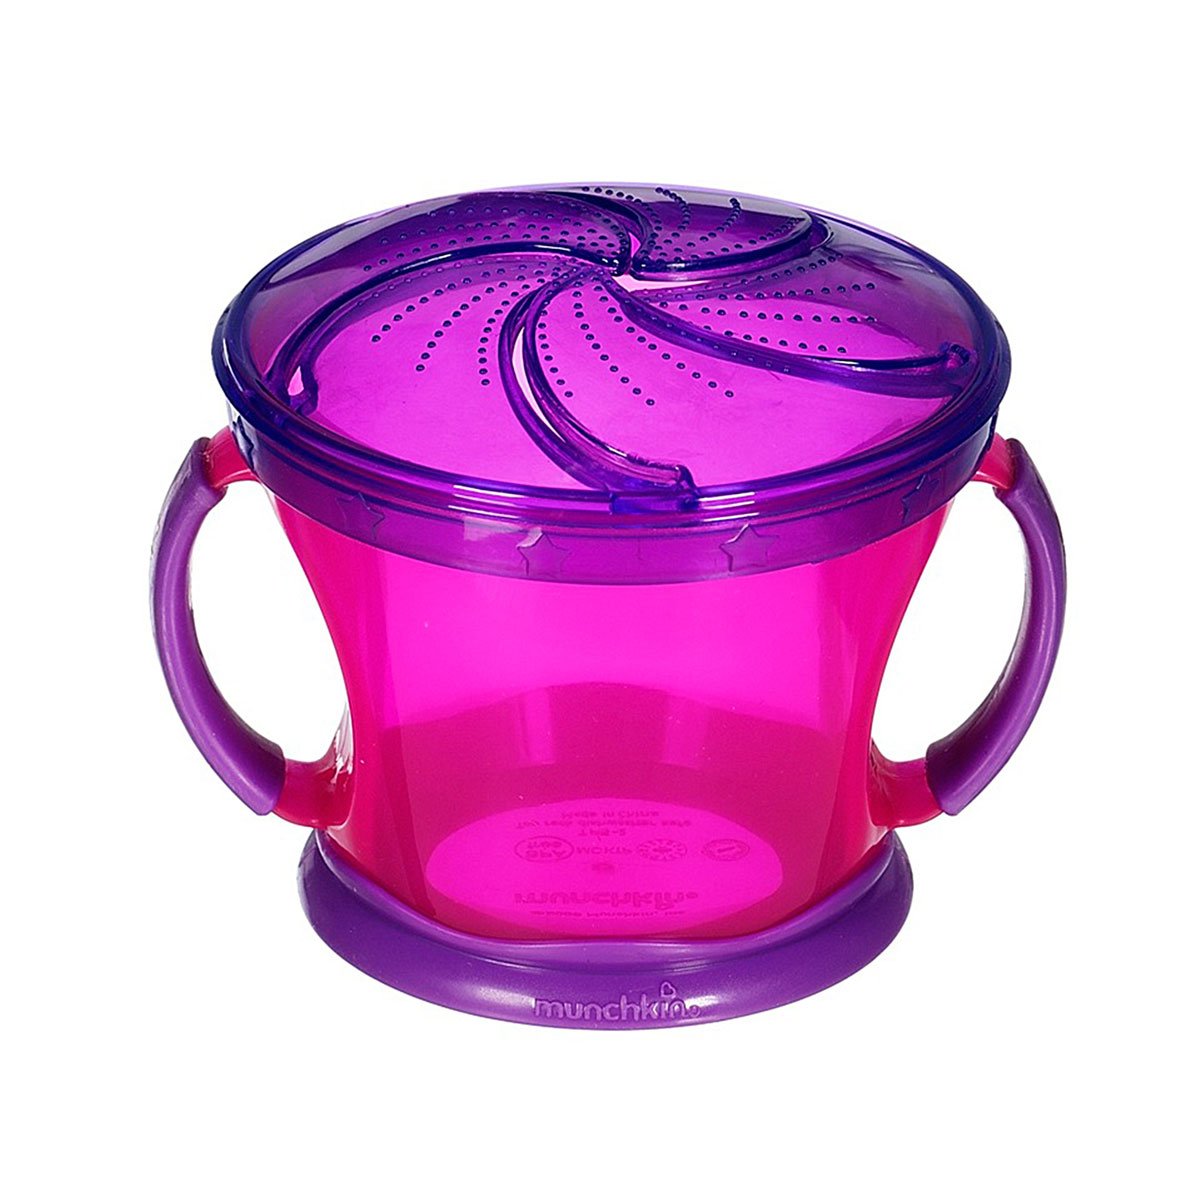 Munchkin Snack Catcher 9 oz. Snack Cups 2 Pack, Pink Purple New